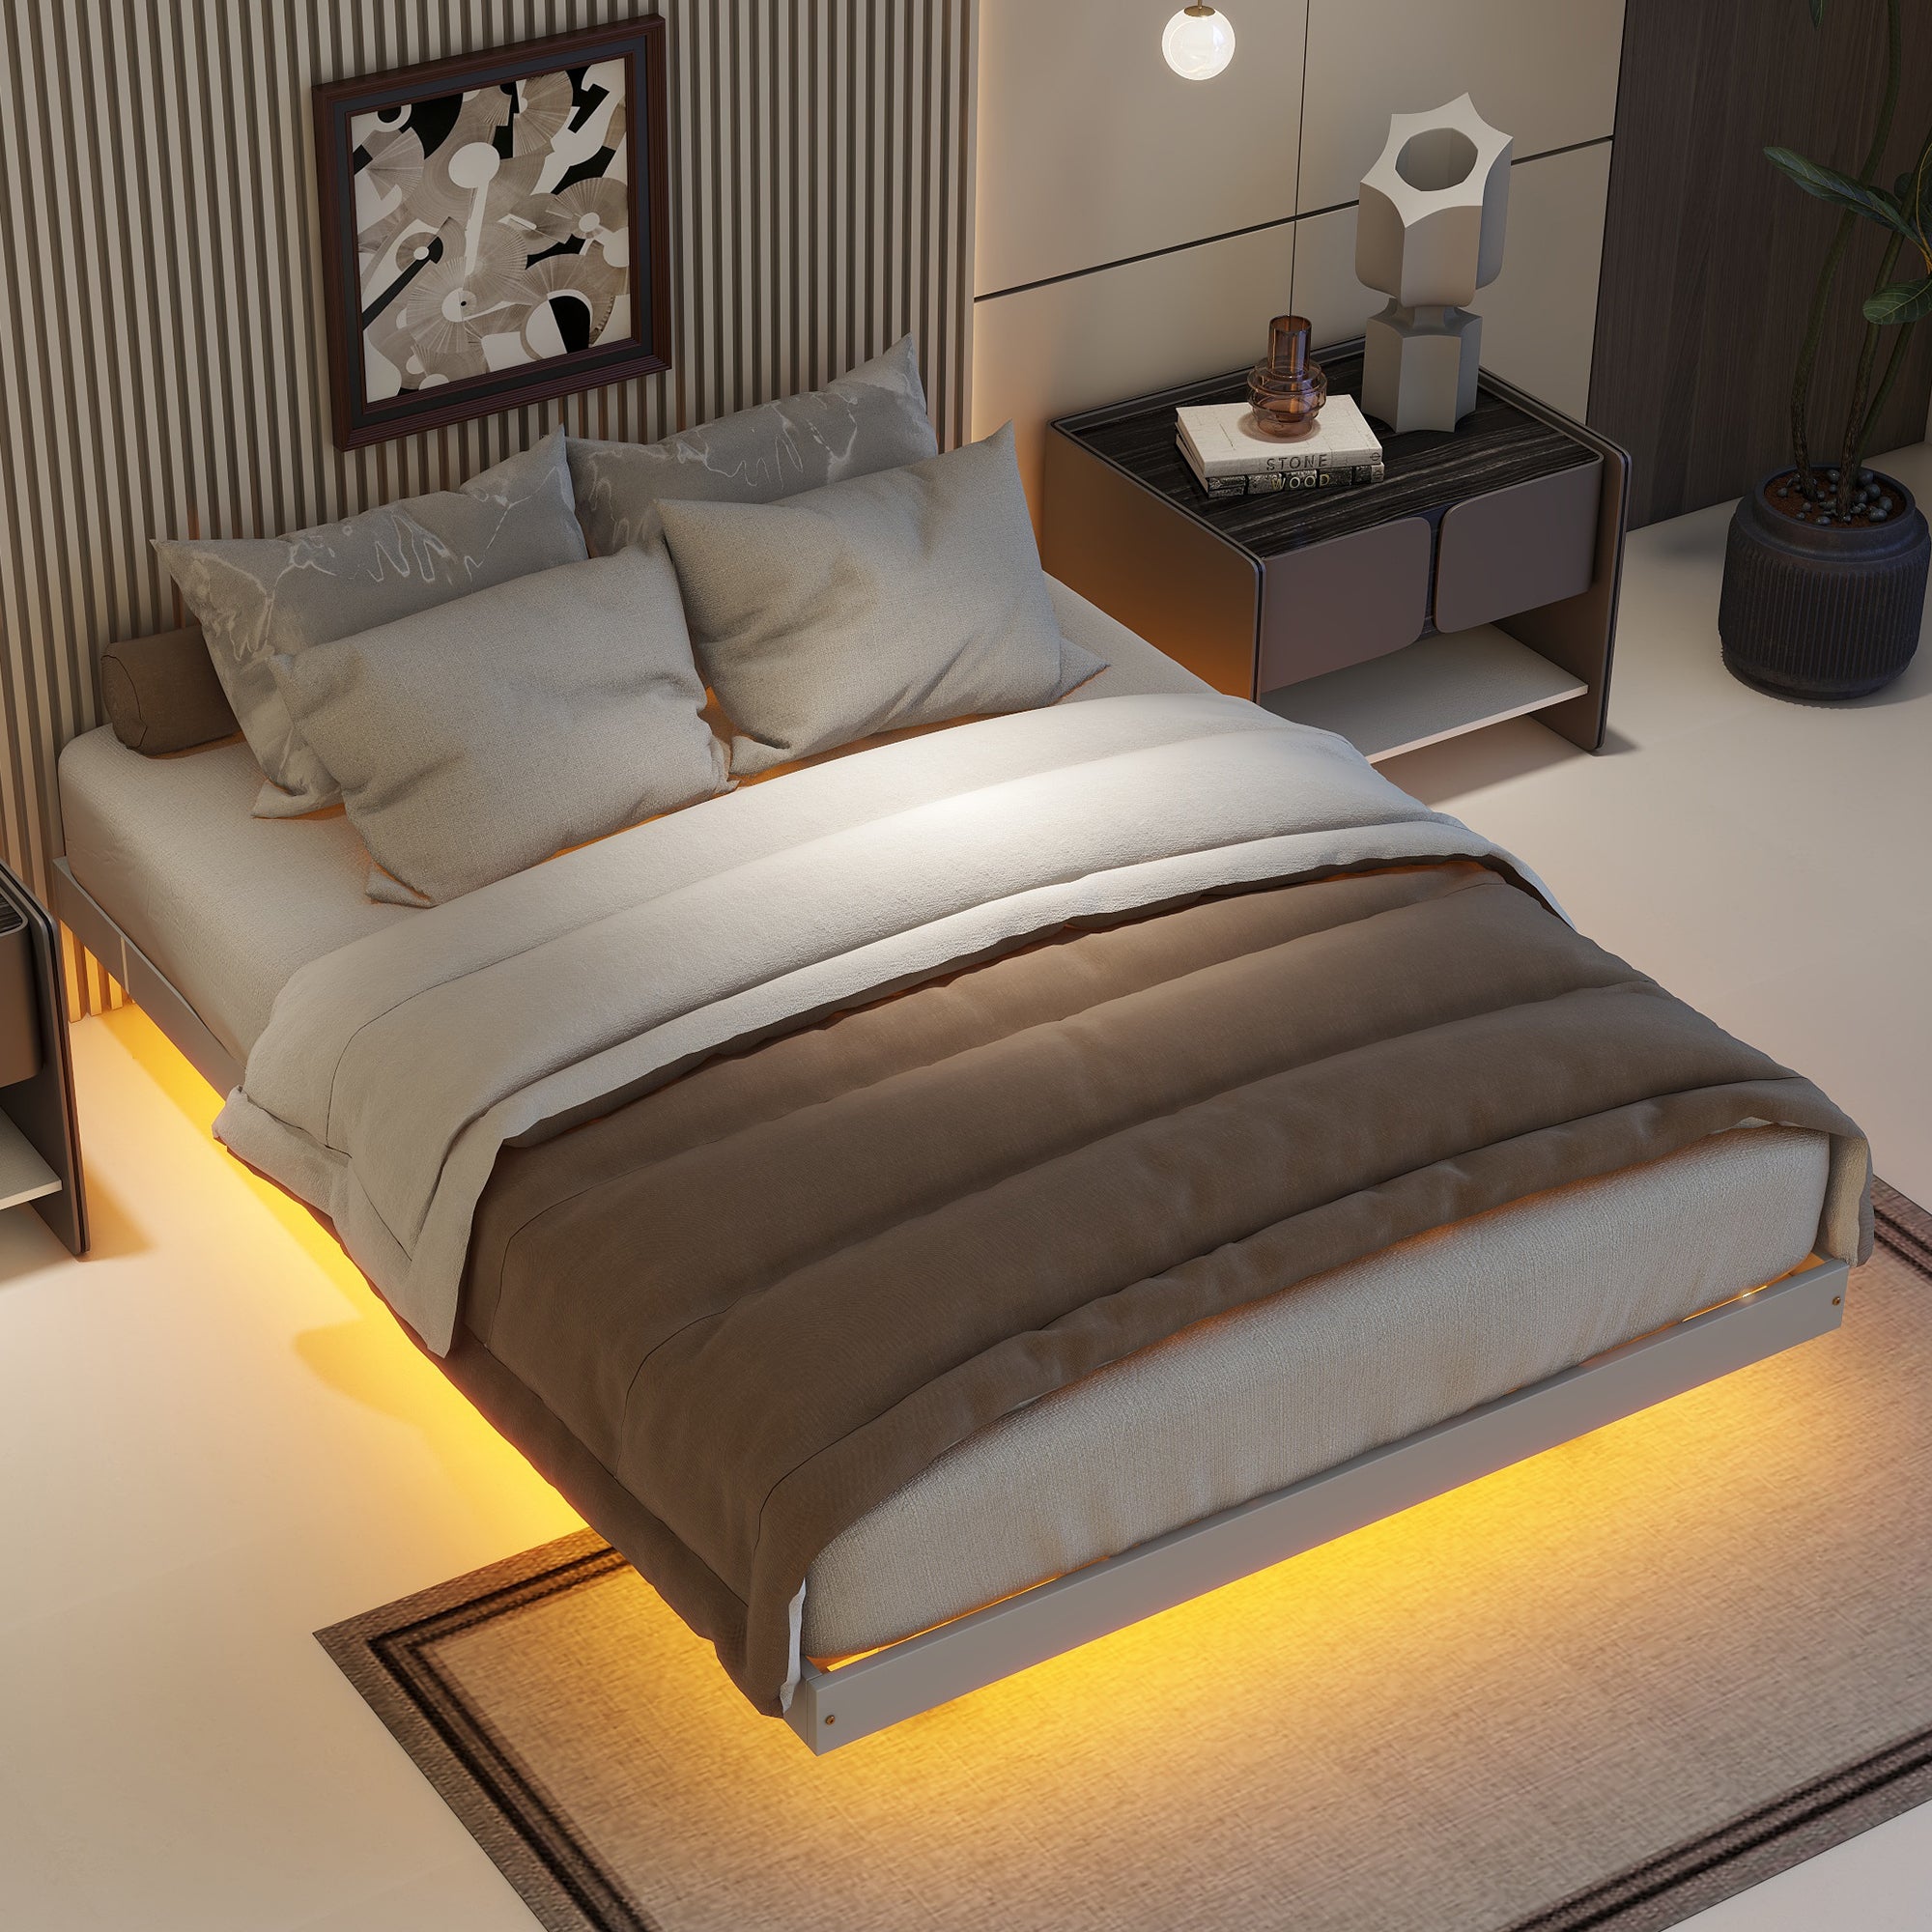 Full Size Floating Bed with LED Lights Underneath, Modern Full Size Low Profile Platform Bed with LED Lights